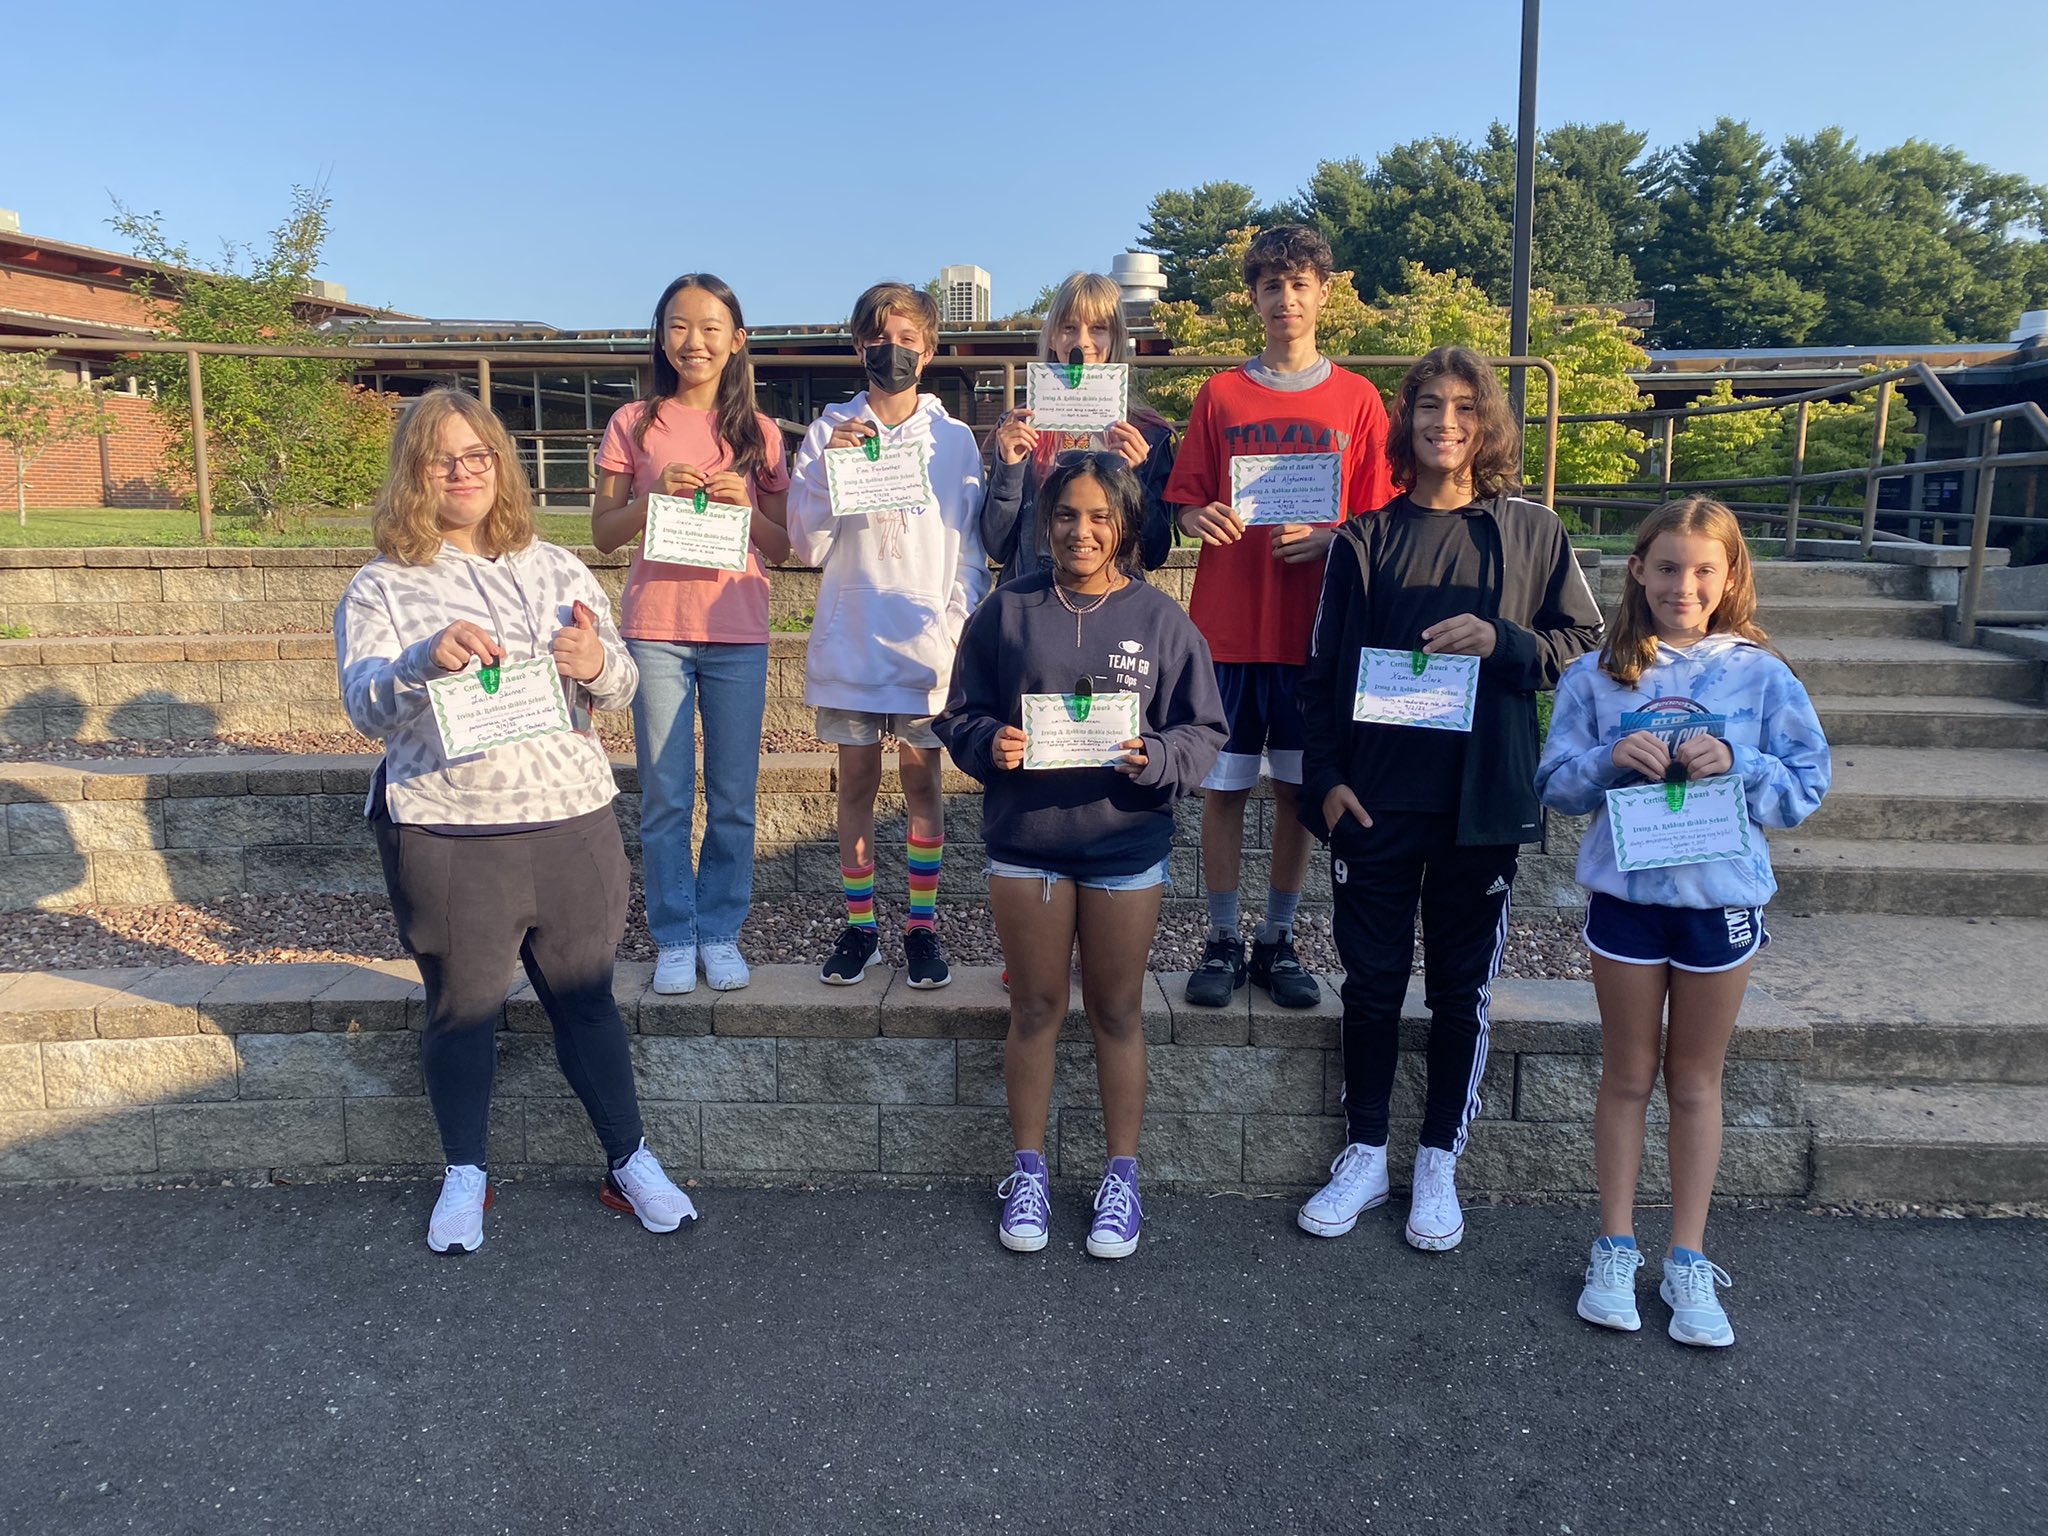 Irving A. Robbins Middle School on X: IAR students are Civic-Minded  Contributors! Administrators and teachers at the Maria Sanchez School in  Hartford received an IAR student's local research project, which will take